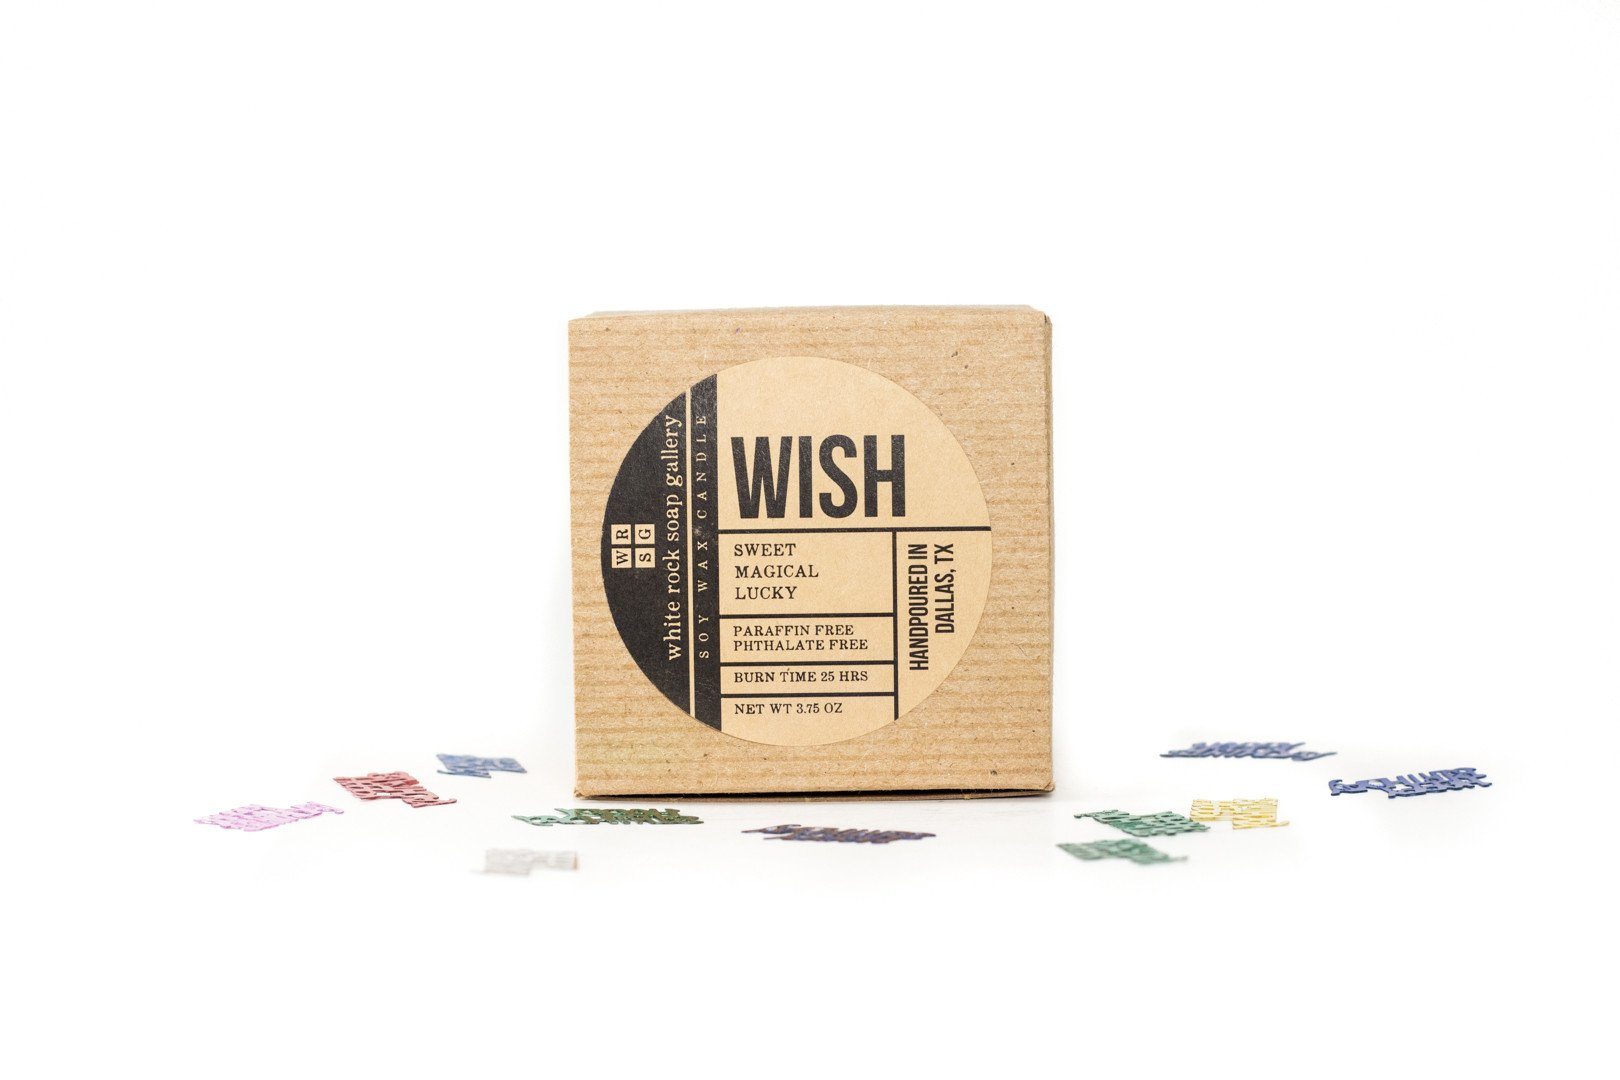 Wish Candle - White Rock Soap Gallery